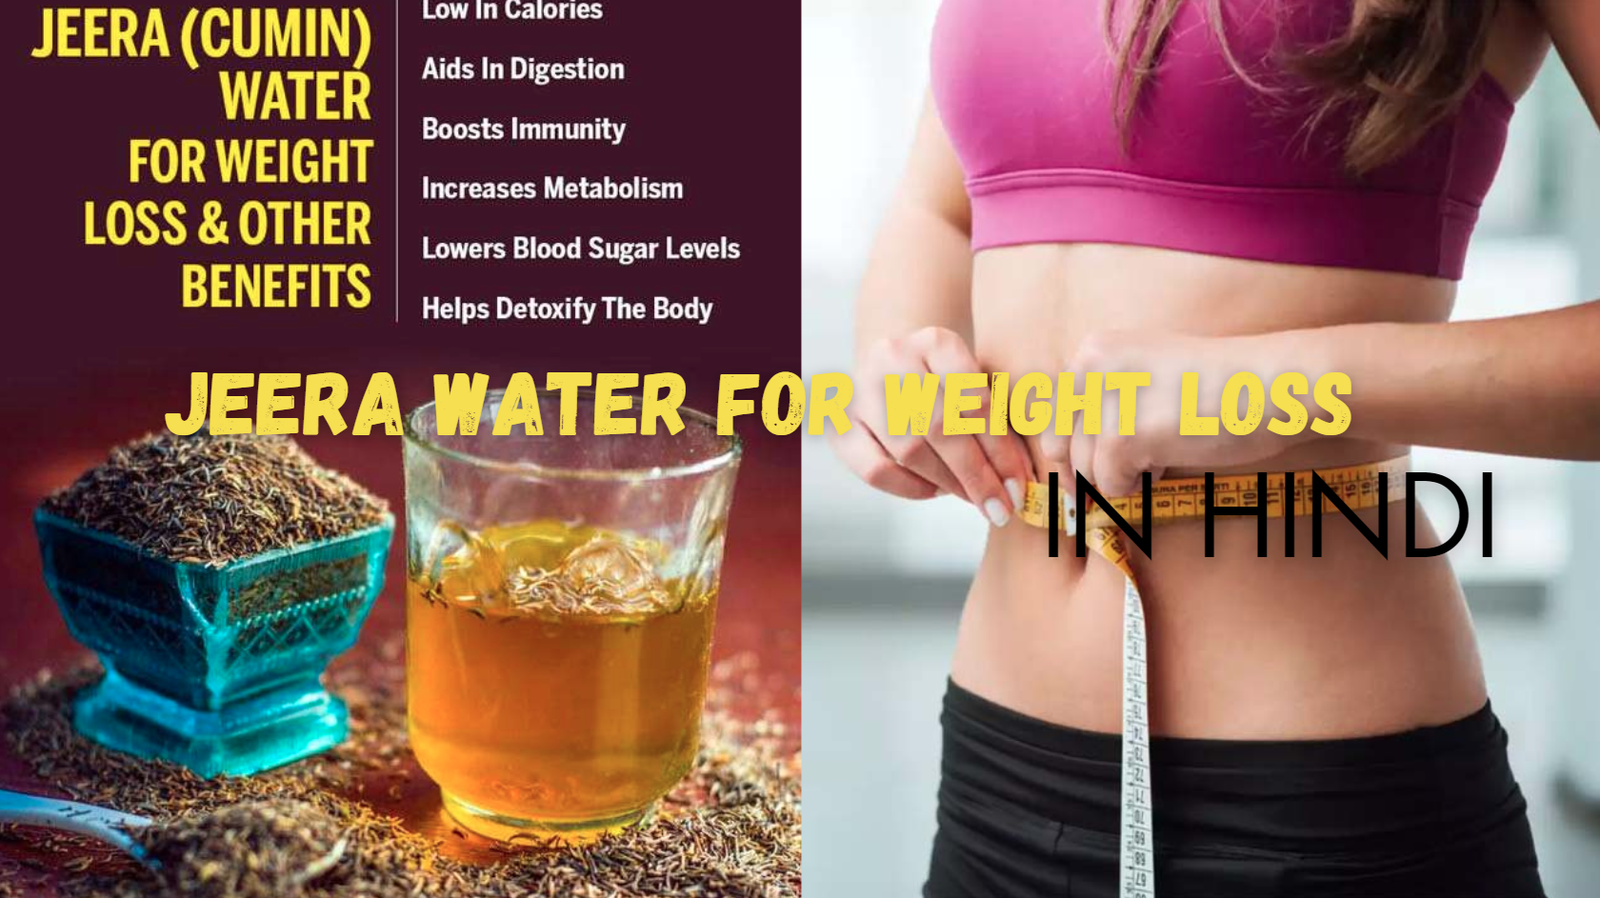 Jeera water for weight loss in hindi